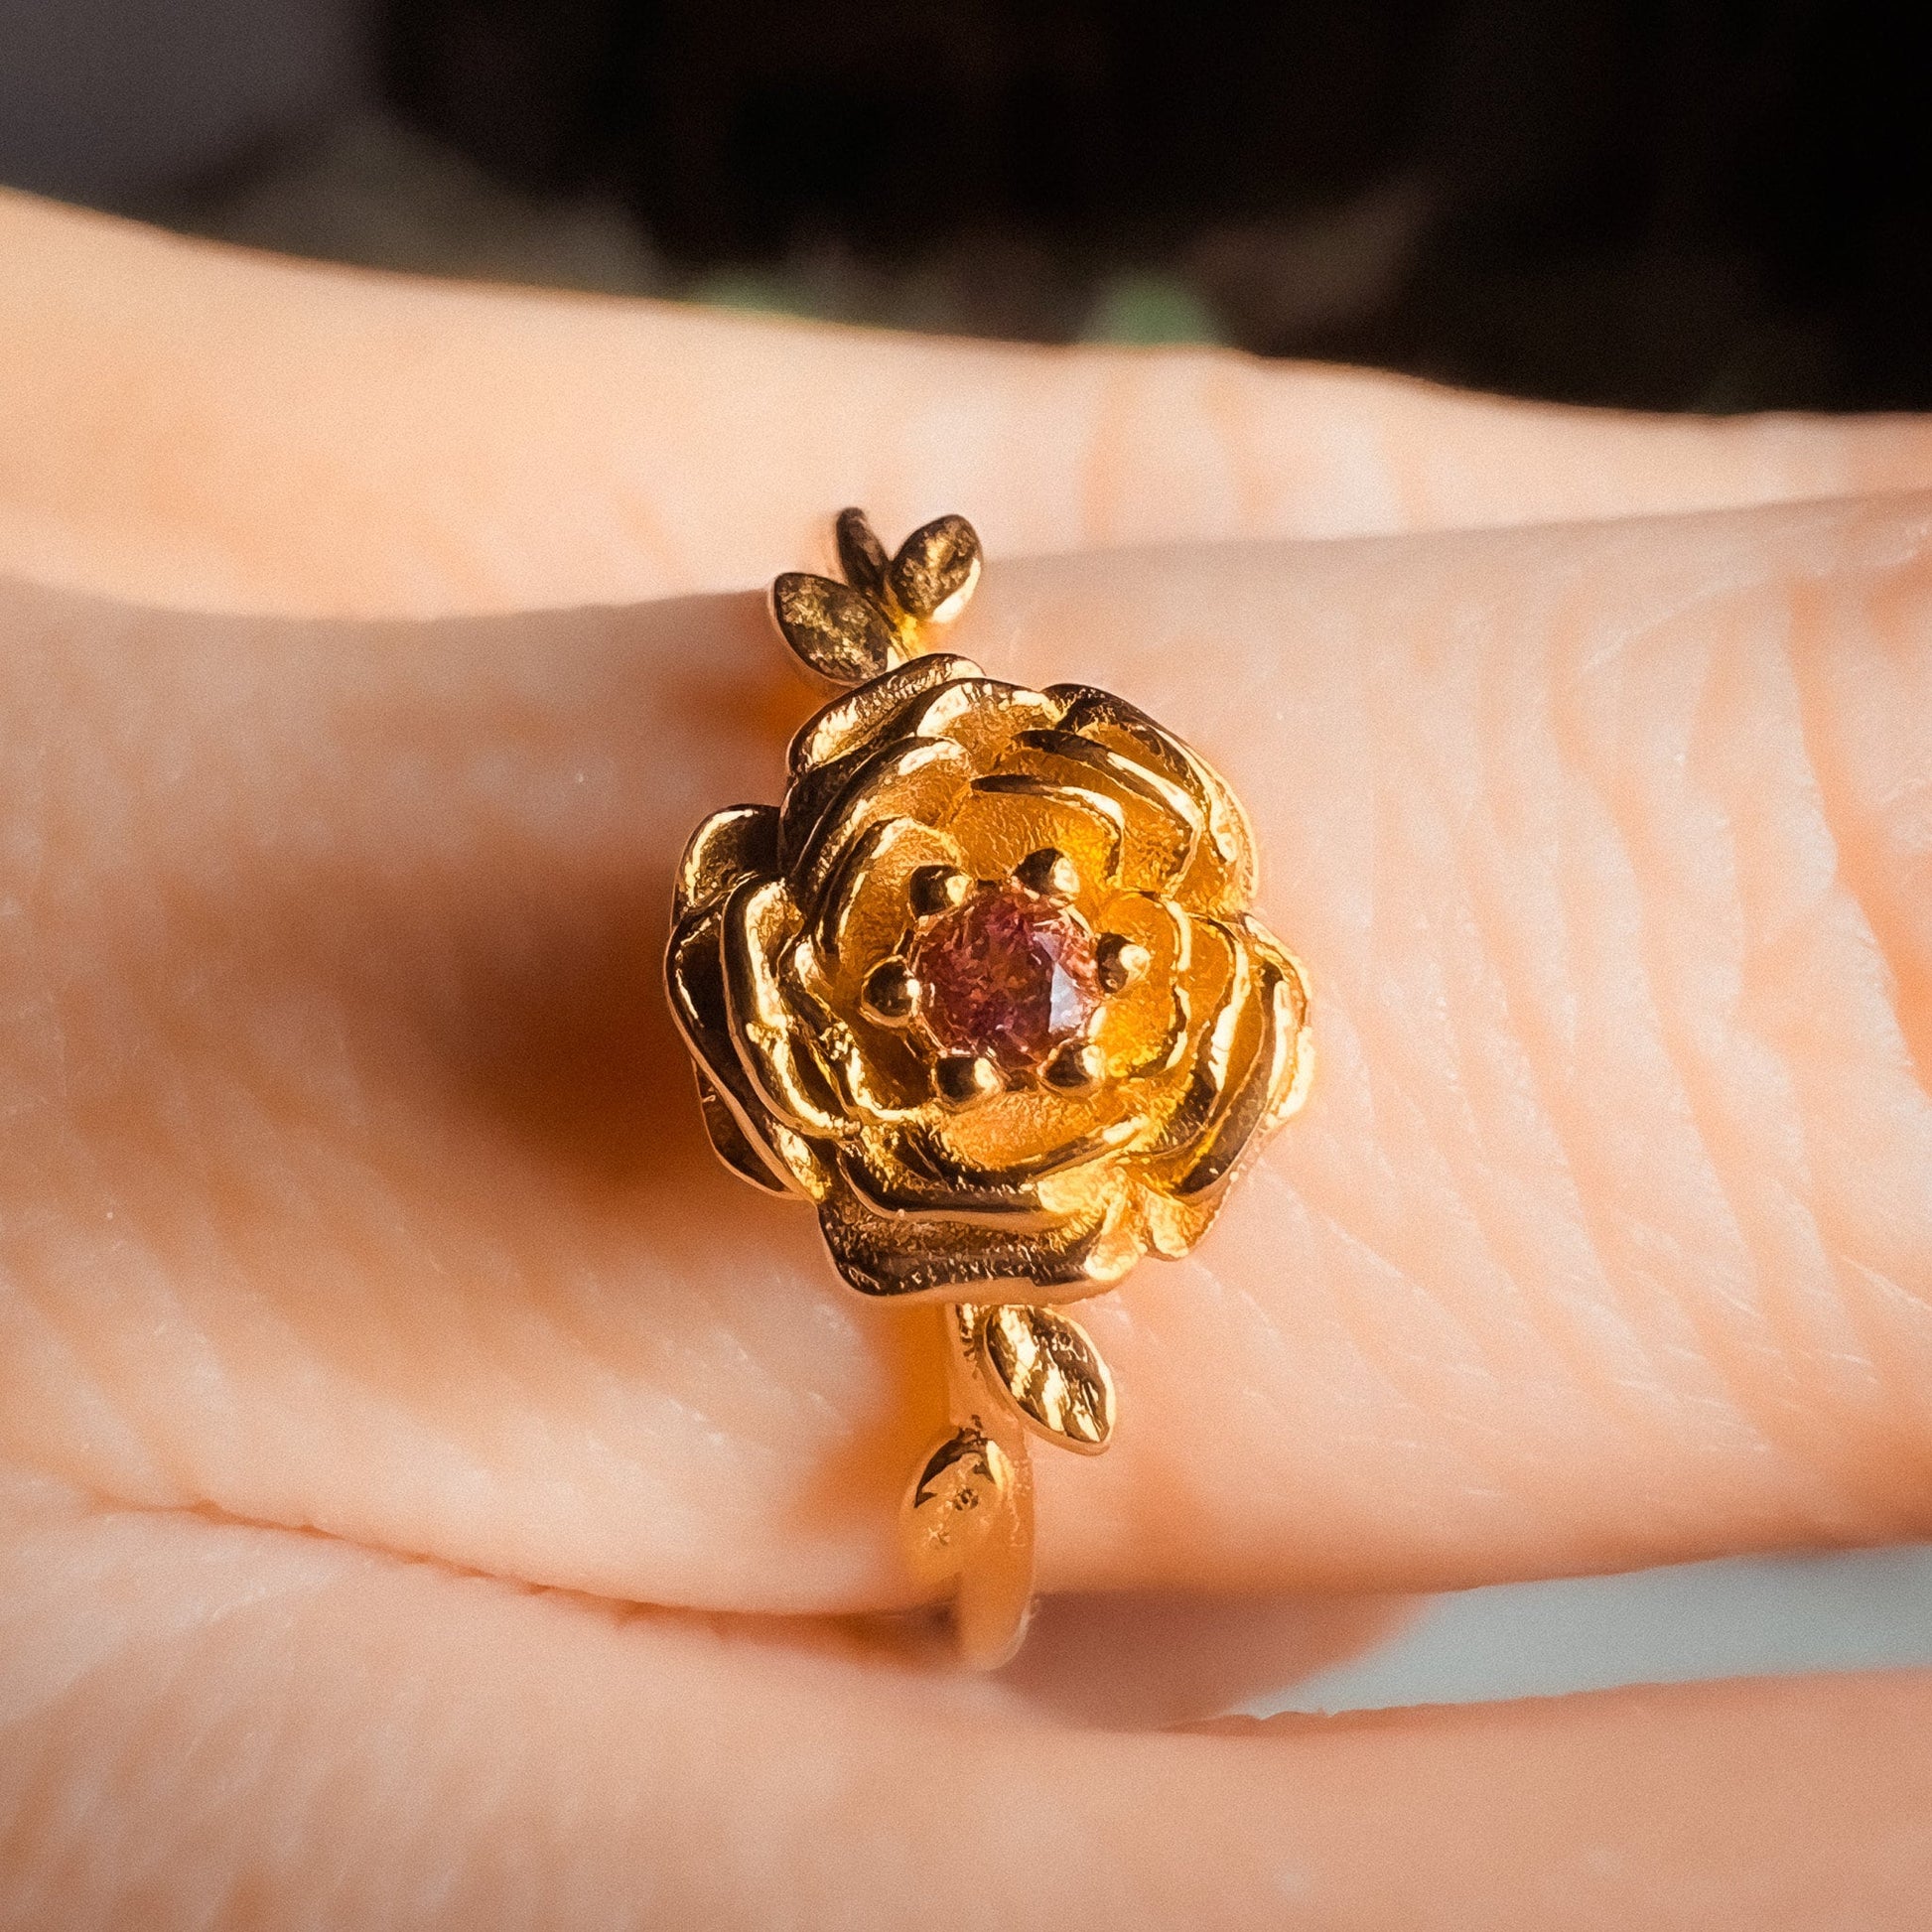 Marigold • October Birth Month Flower Ring • 2mm Pink Tourmaline • Solid Gold or Solid Silver • Ameliarrayjewelry